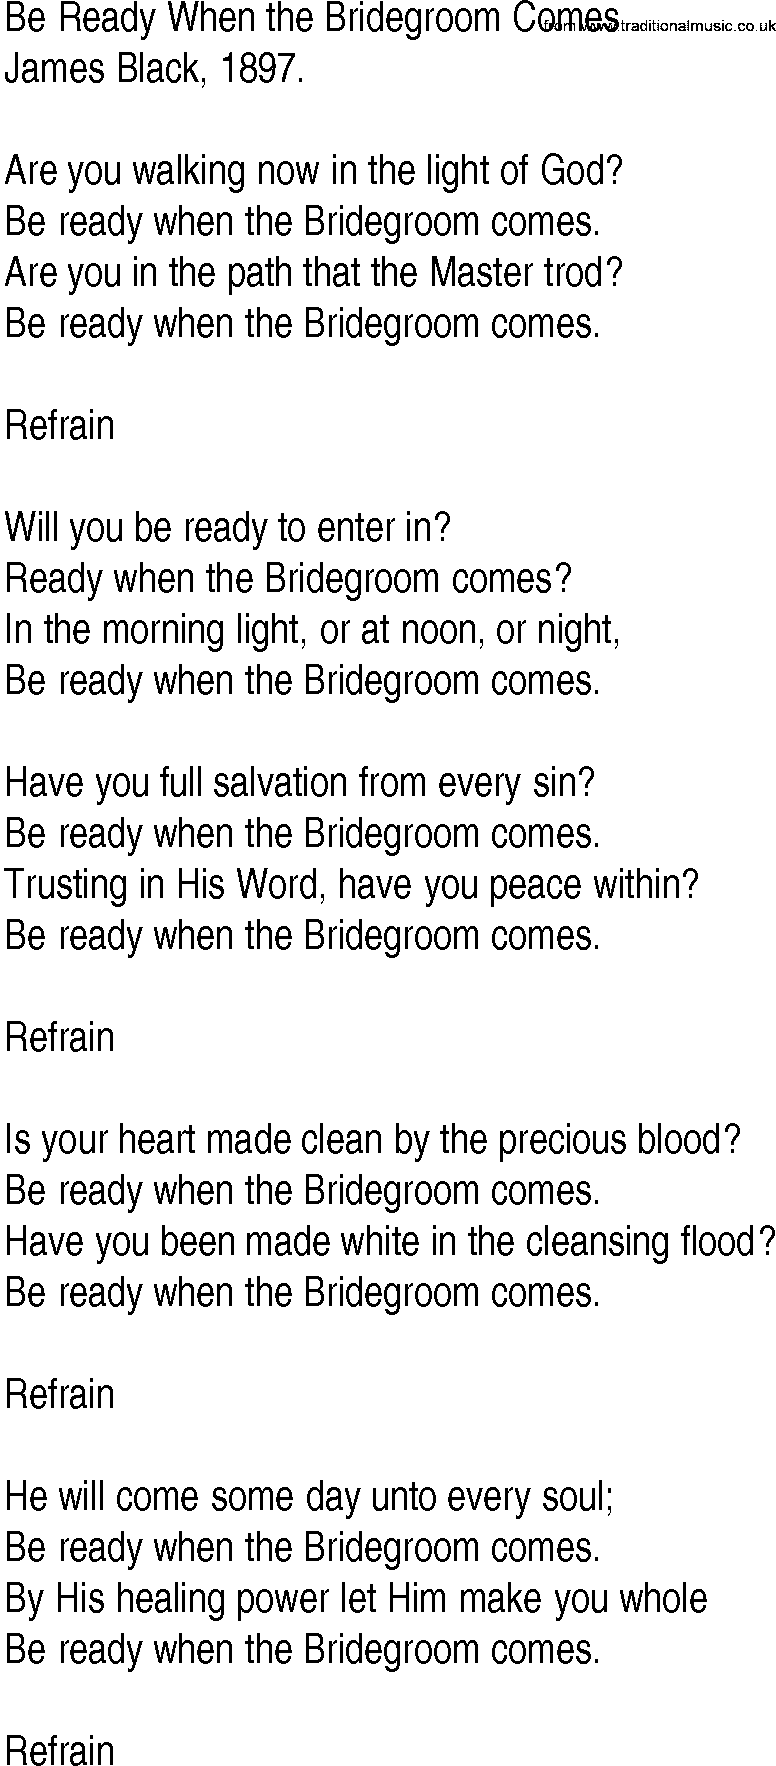 Hymn and Gospel Song: Be Ready When the Bridegroom Comes by James Black lyrics